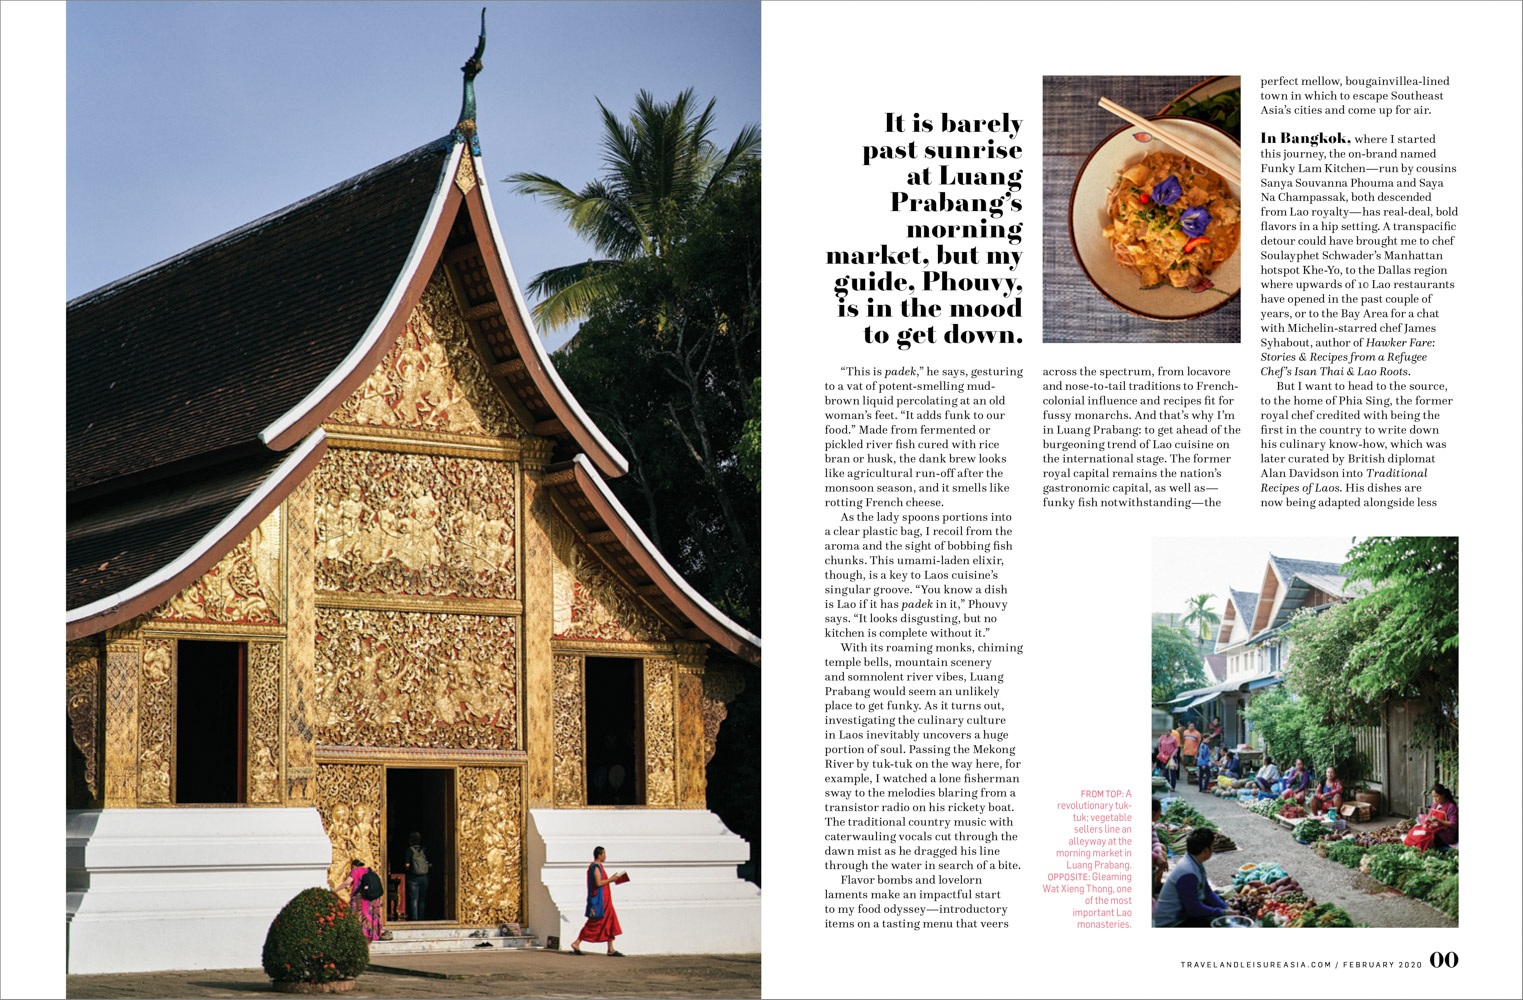 From a travel story on Laotian cuisine in Luang Prabang. 